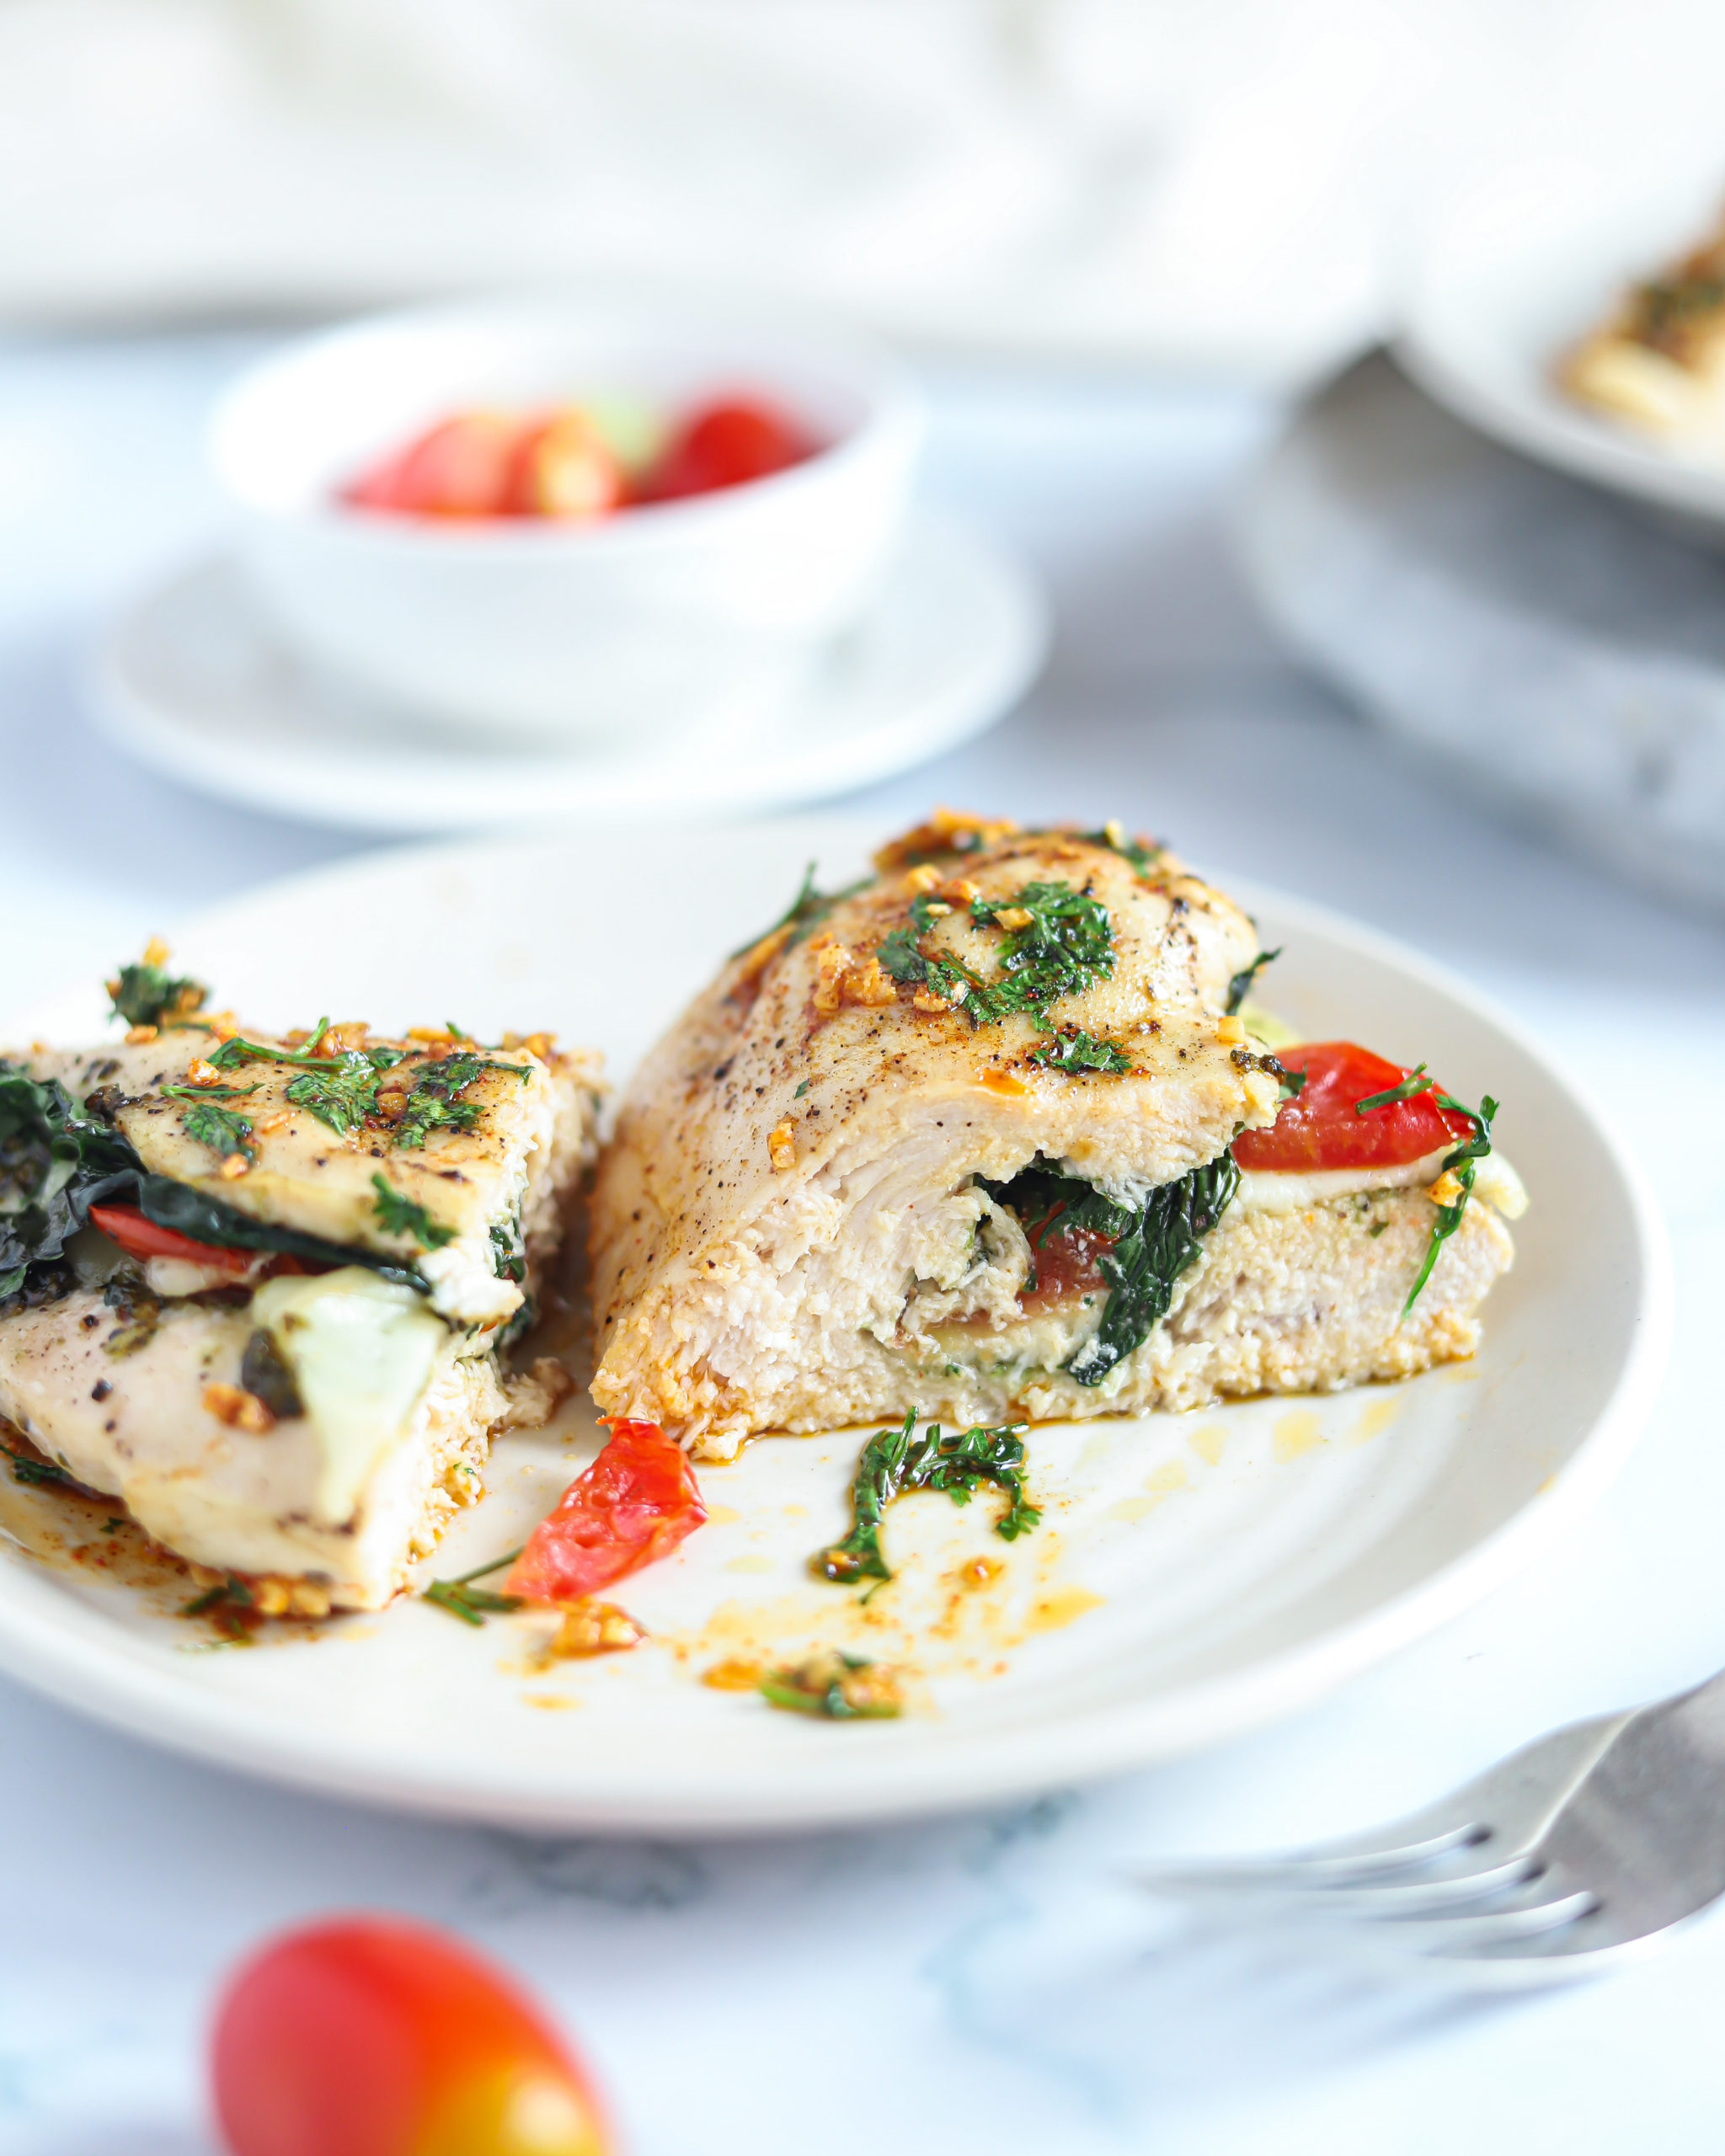 Cheesy Pesto Spinach Stuffed Chicken Breasts sliced in half on a. white plate.